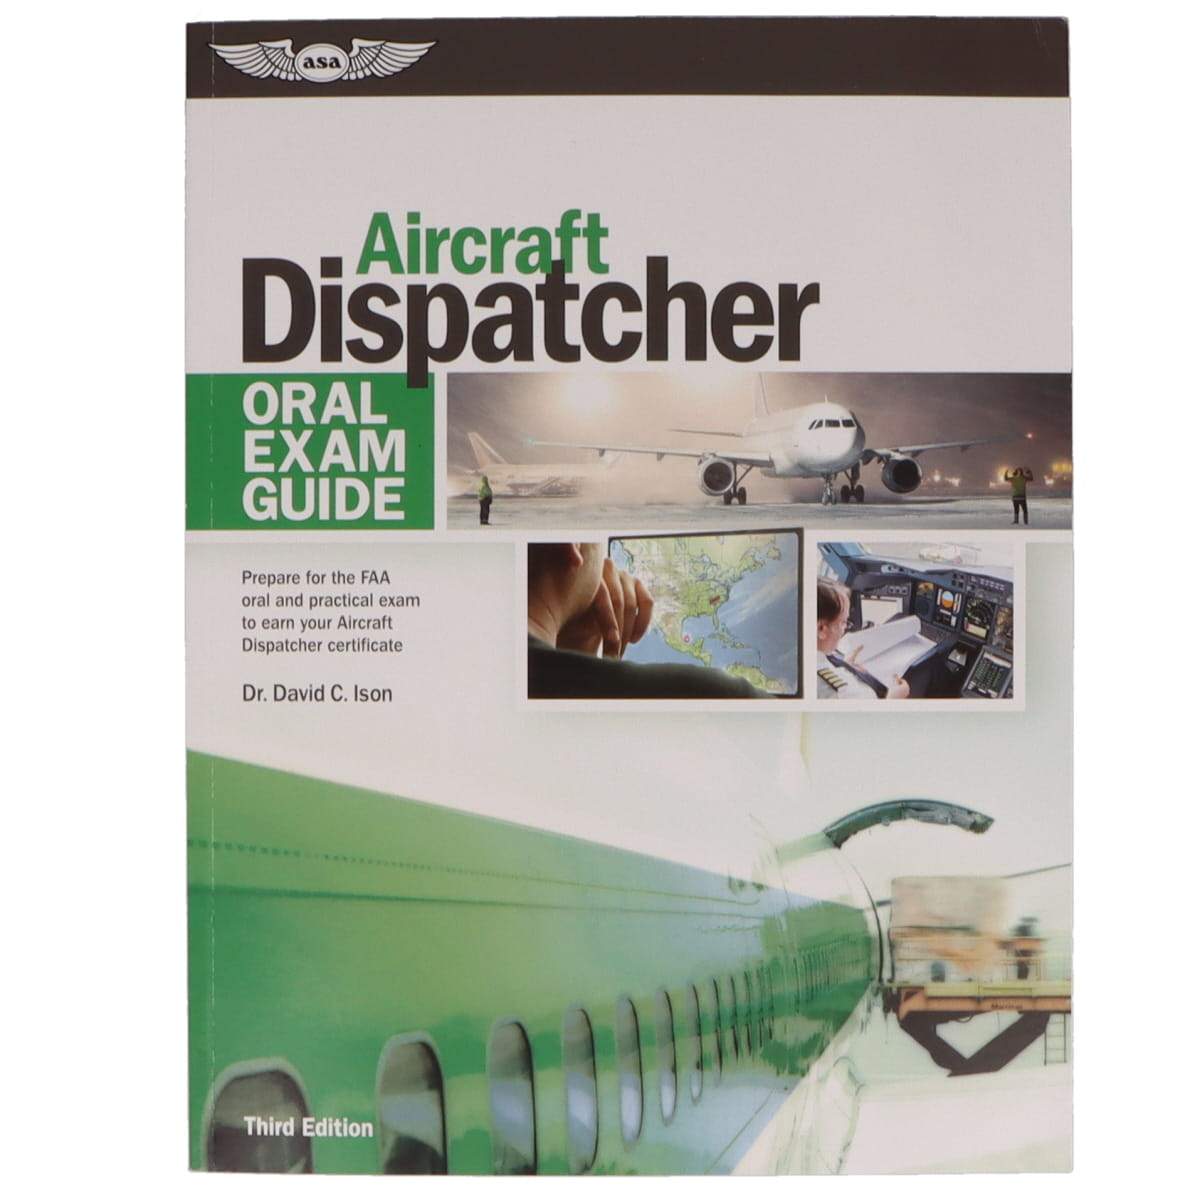 ASA Oral Exam Guide: Aircraft Dispatcher, 3rd Edition (Softcover)